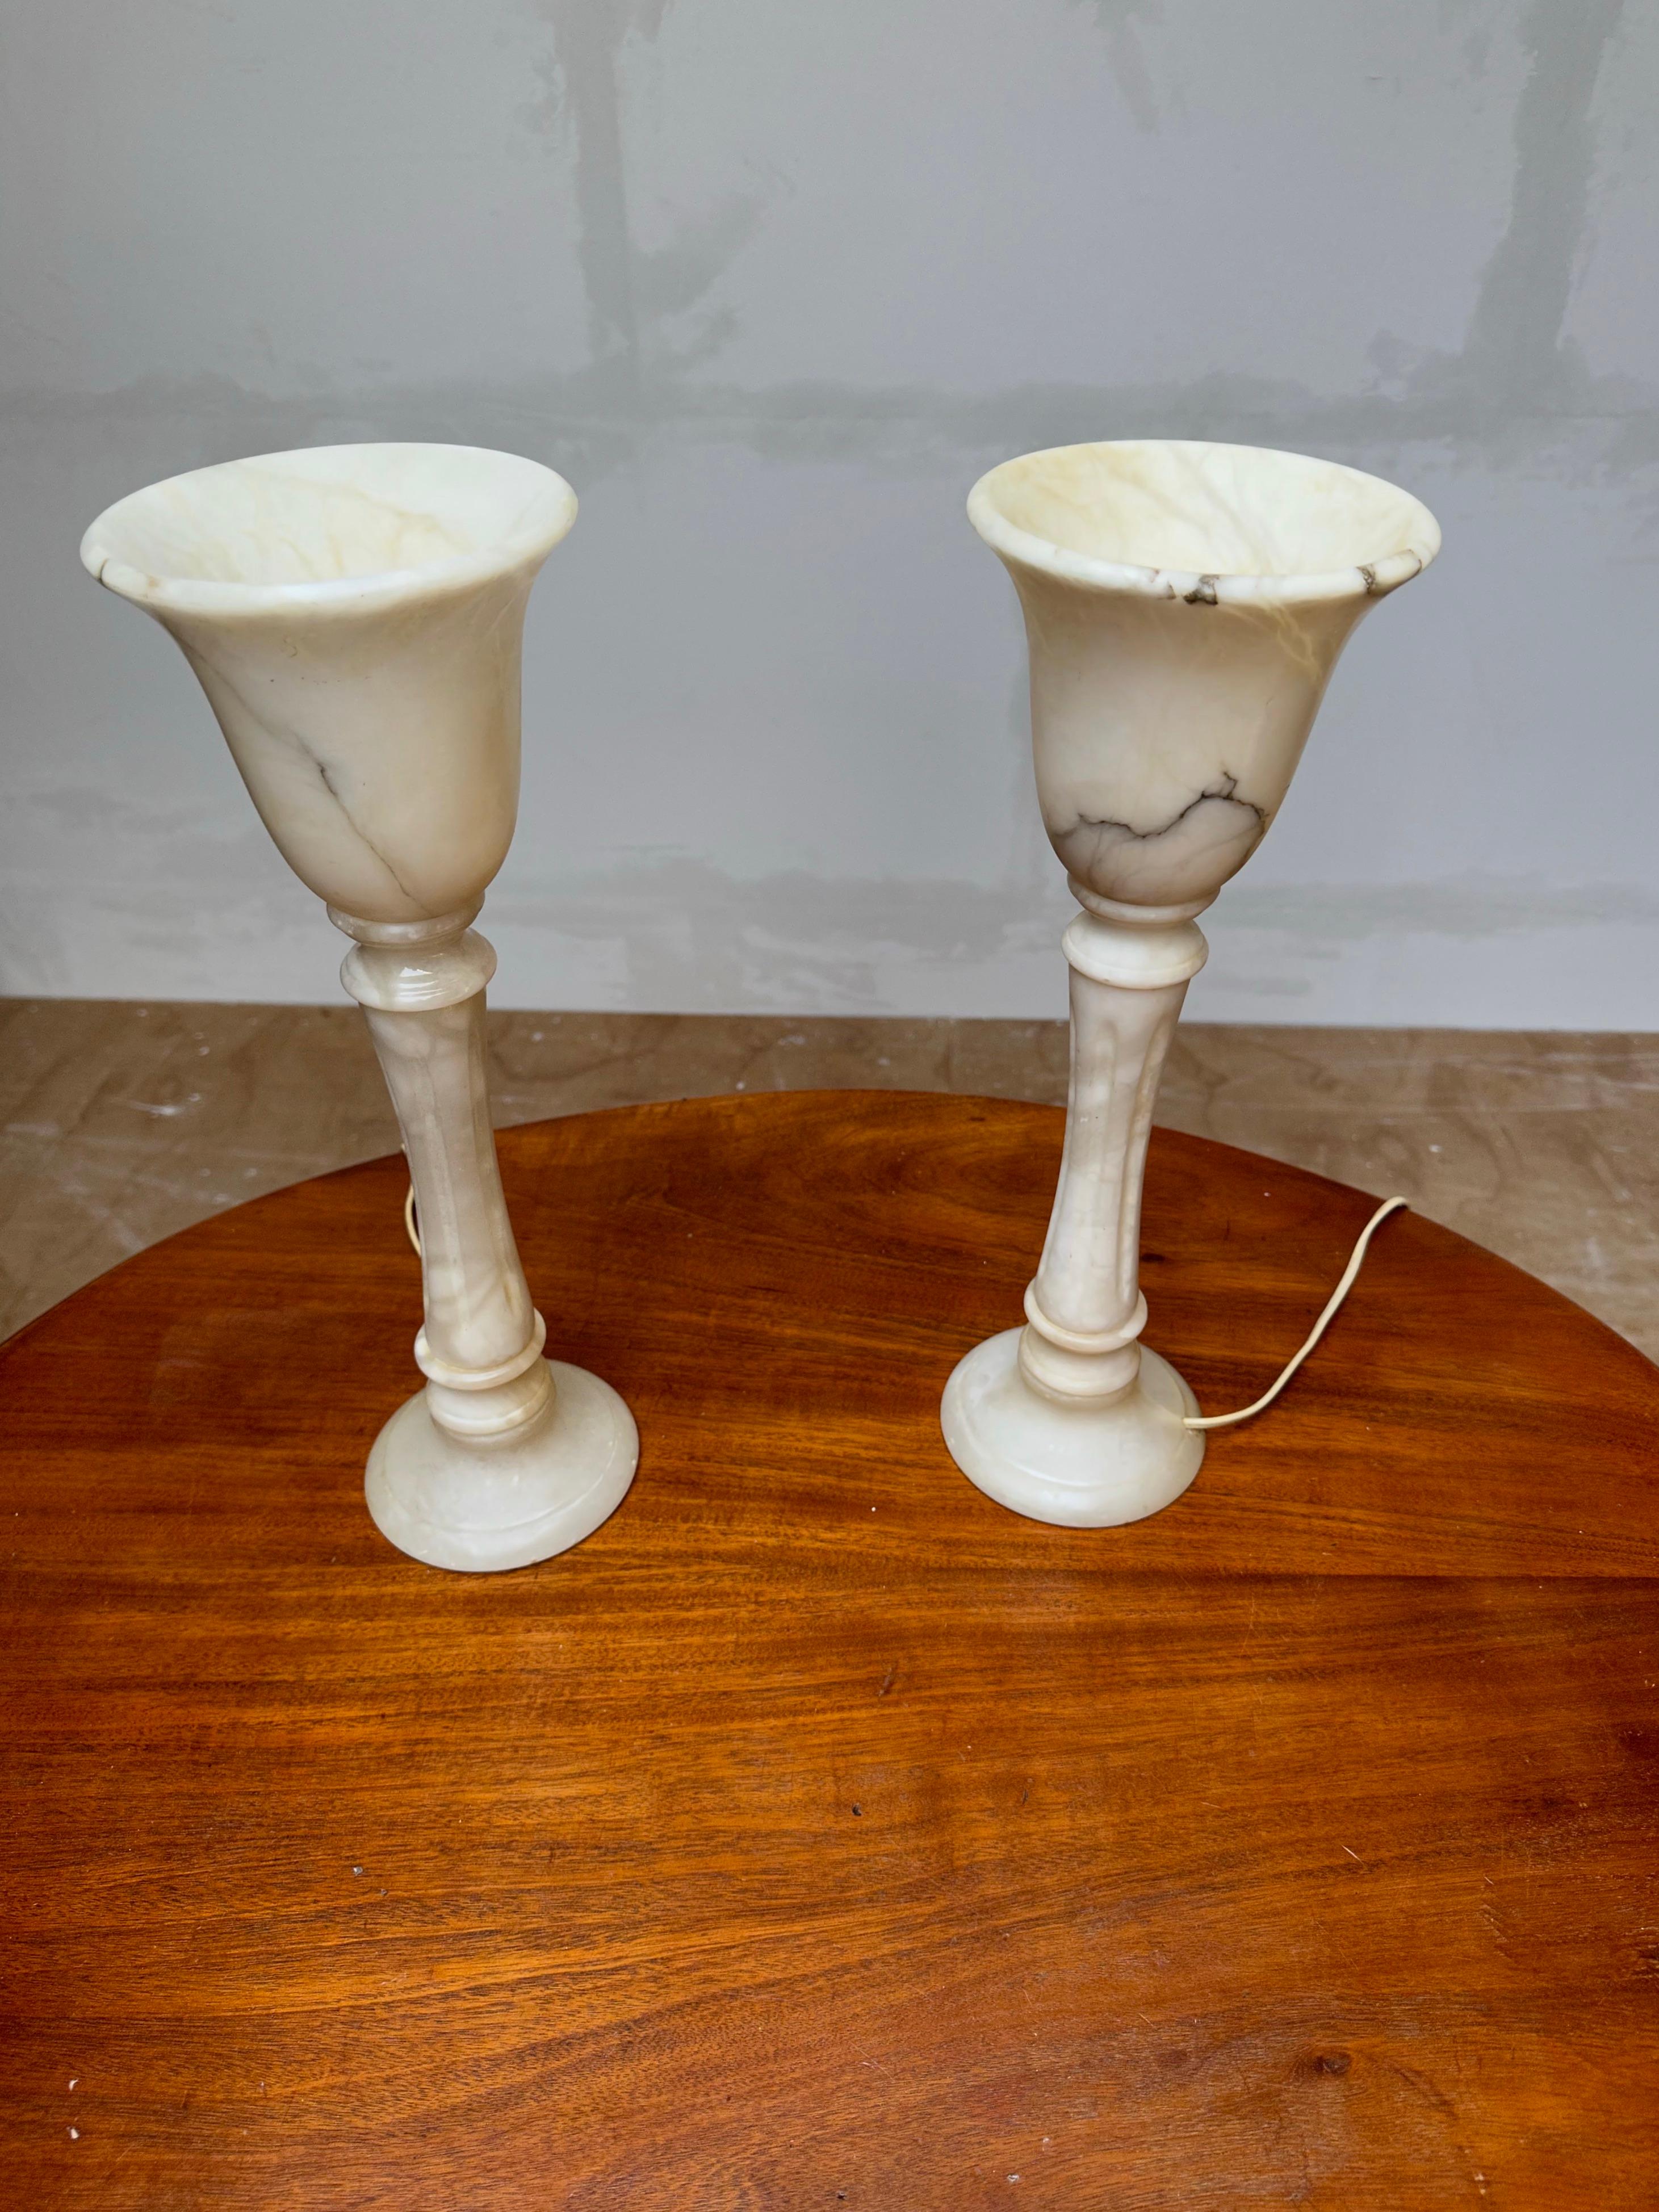 Great pair of midcentury made alabaster table or desk lamps in a timeless classical style.

If you are looking for a great shape and practical Size pair of table lamps to grace your living space then these natural mineral stone lights could be